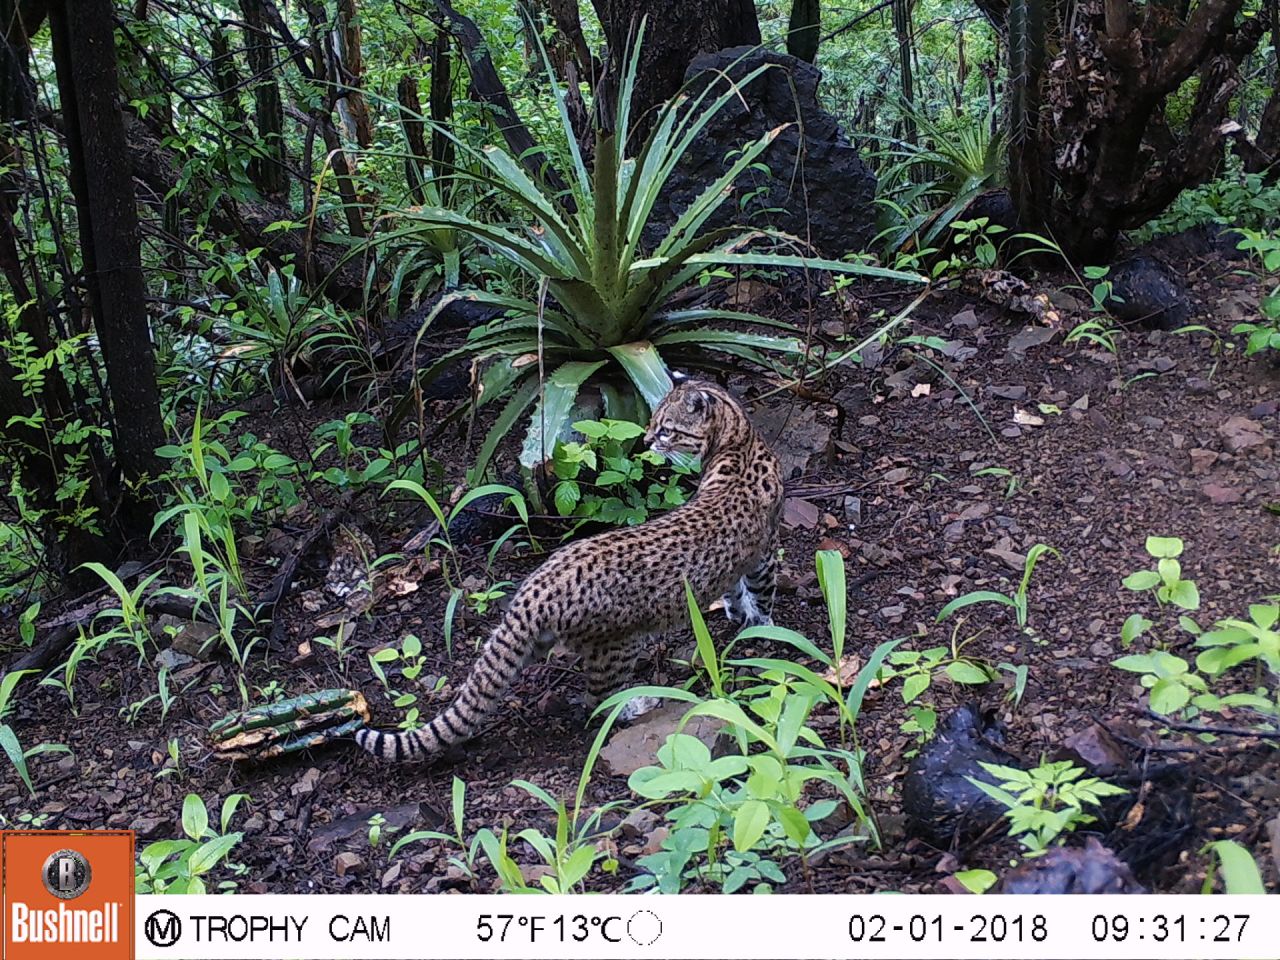 Velez-Liendo says that thanks to the research into bears, scientists now have access to more information on the wider ecosystem. In the project site in Bolivia, photos have been captured of species that had never before been seen in the area, such as a wildcat known as Geoffroy's leopard (pictured). 